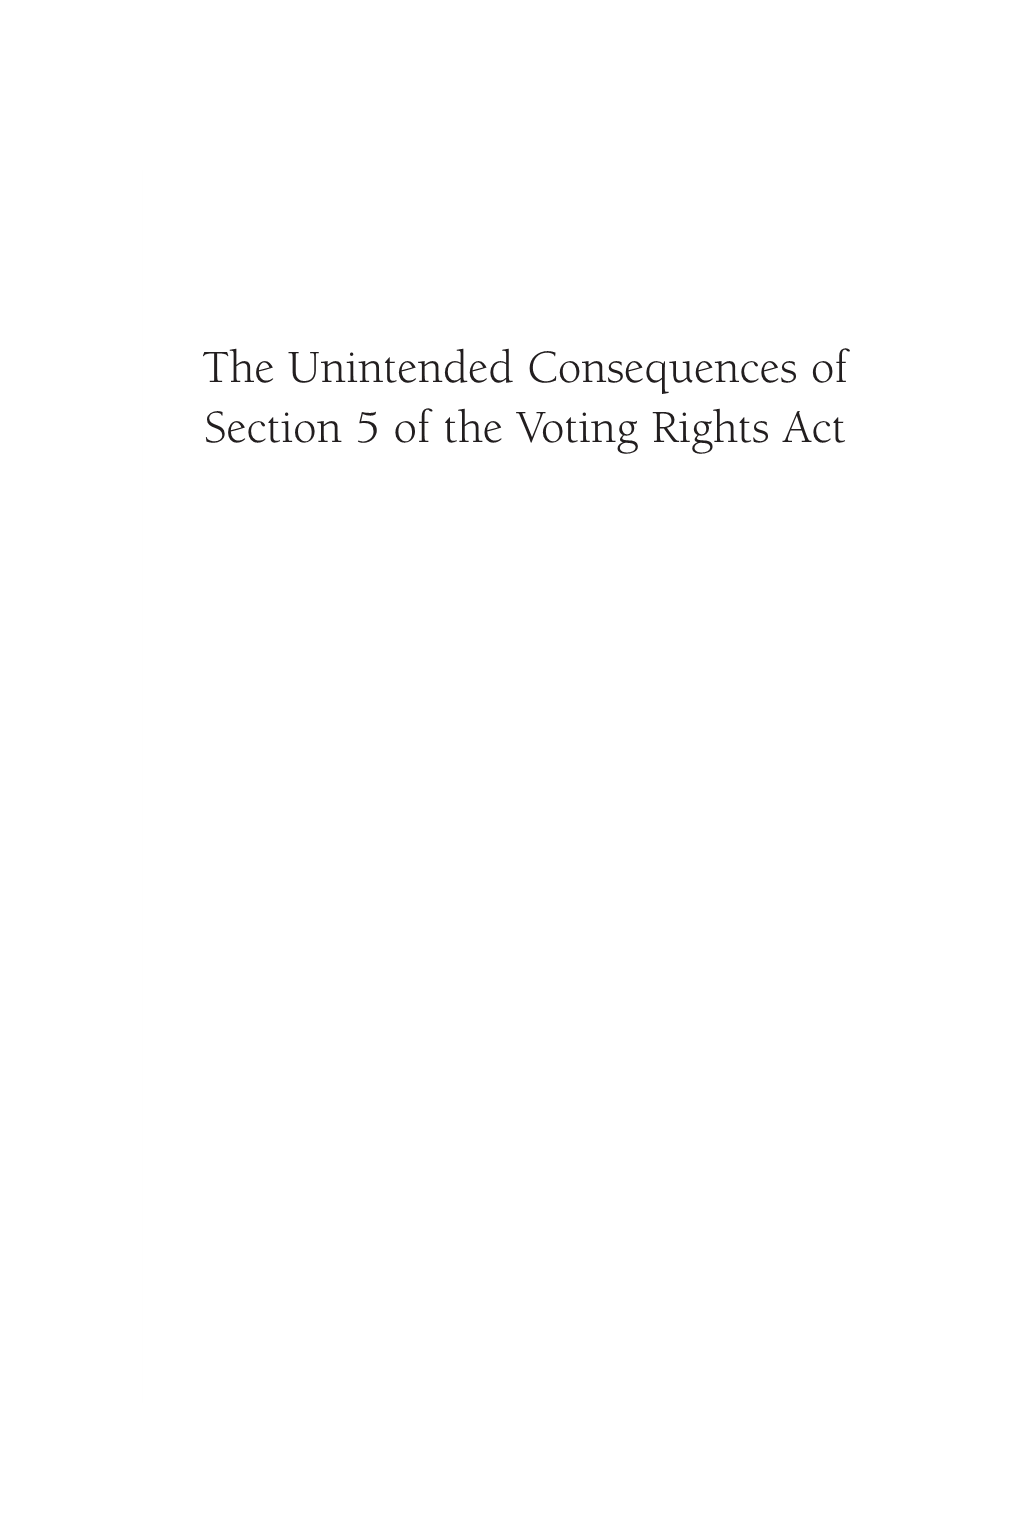 Unintended Consequences of Section 5 of the Voting Rights Act